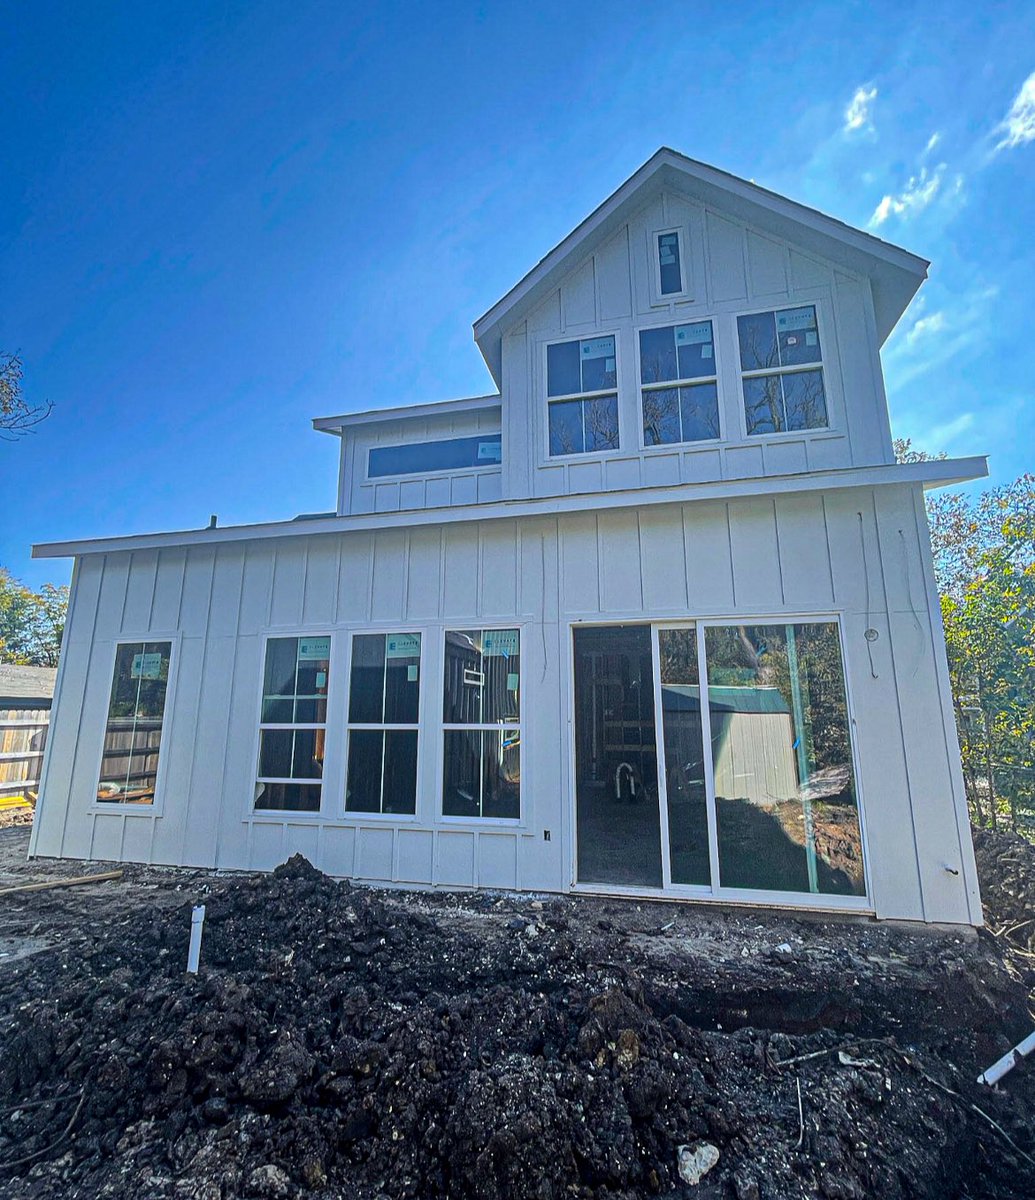 We build Accessory Dwelling Units (ADU’s) for our developer clients no matter if the opportunity is located in San Diego, Austin or Tampa. Send us your ADU construction drawings to bid info@inabnetcontracting.com #newconstruction #accessorydwellingunit #generalcontractor